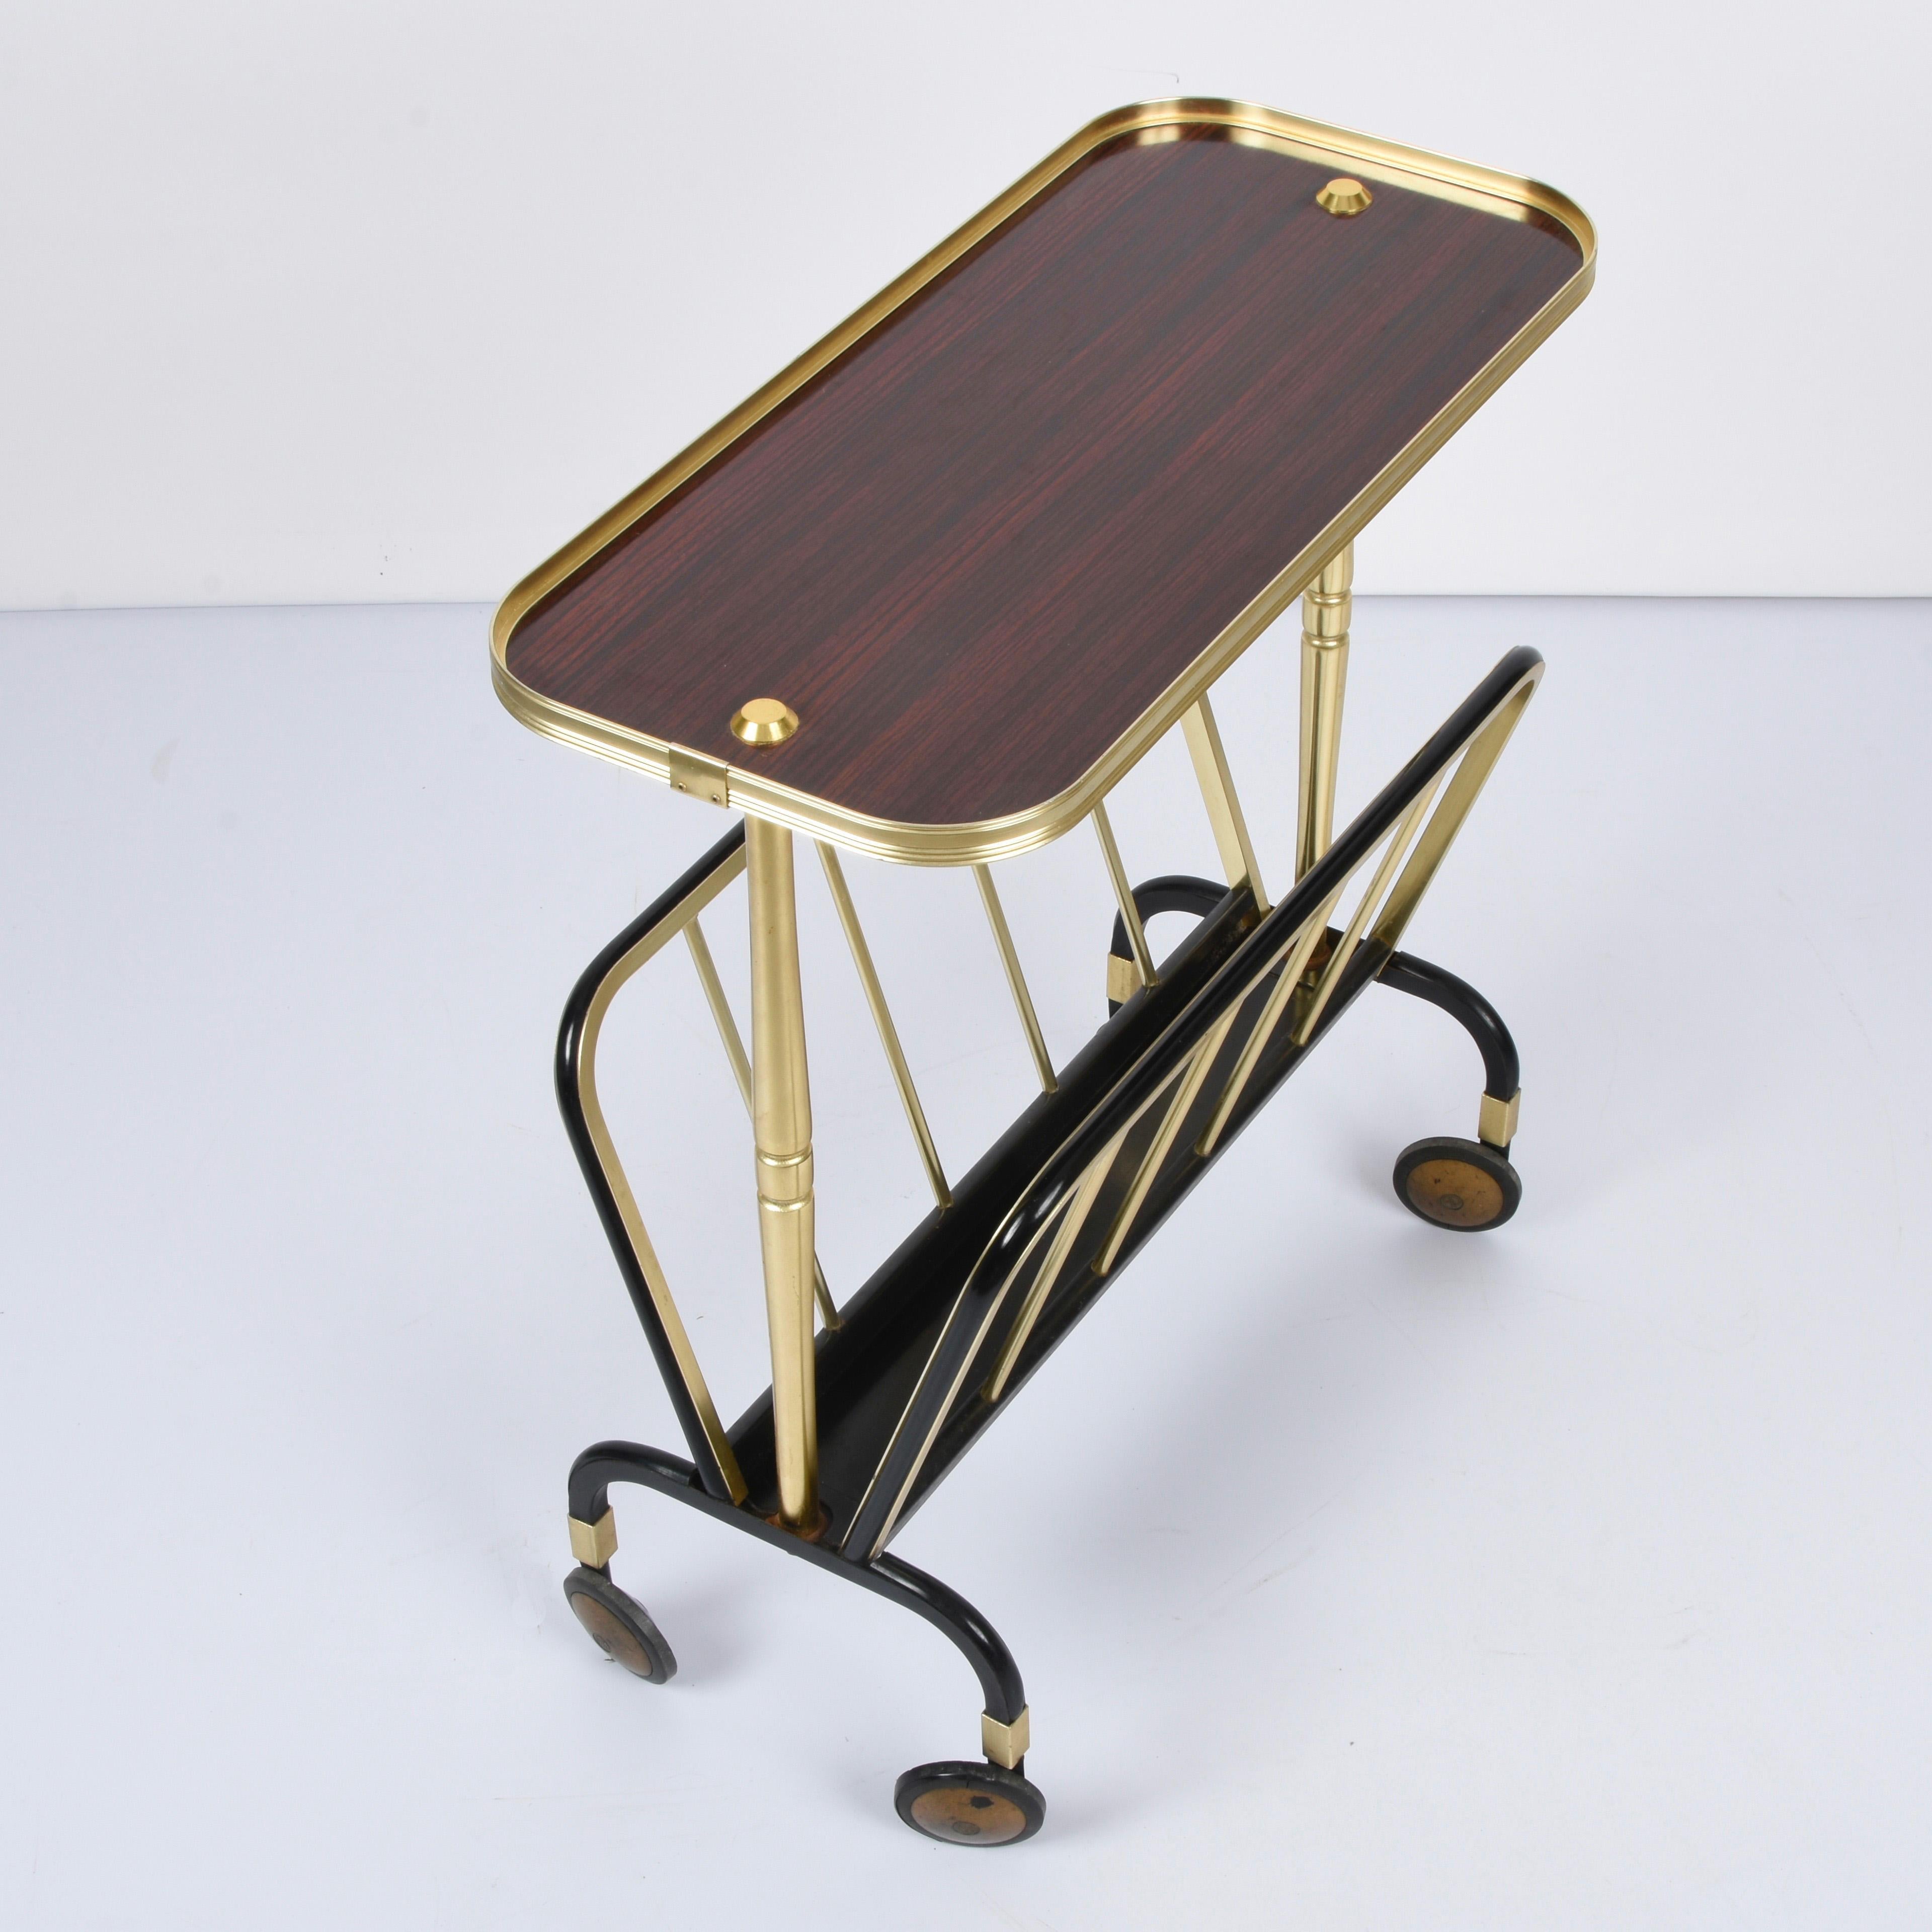 20th Century Ico Parisi Midcentury Aluminum and Formica Trolley Magazine Rack for MB, 1960s For Sale